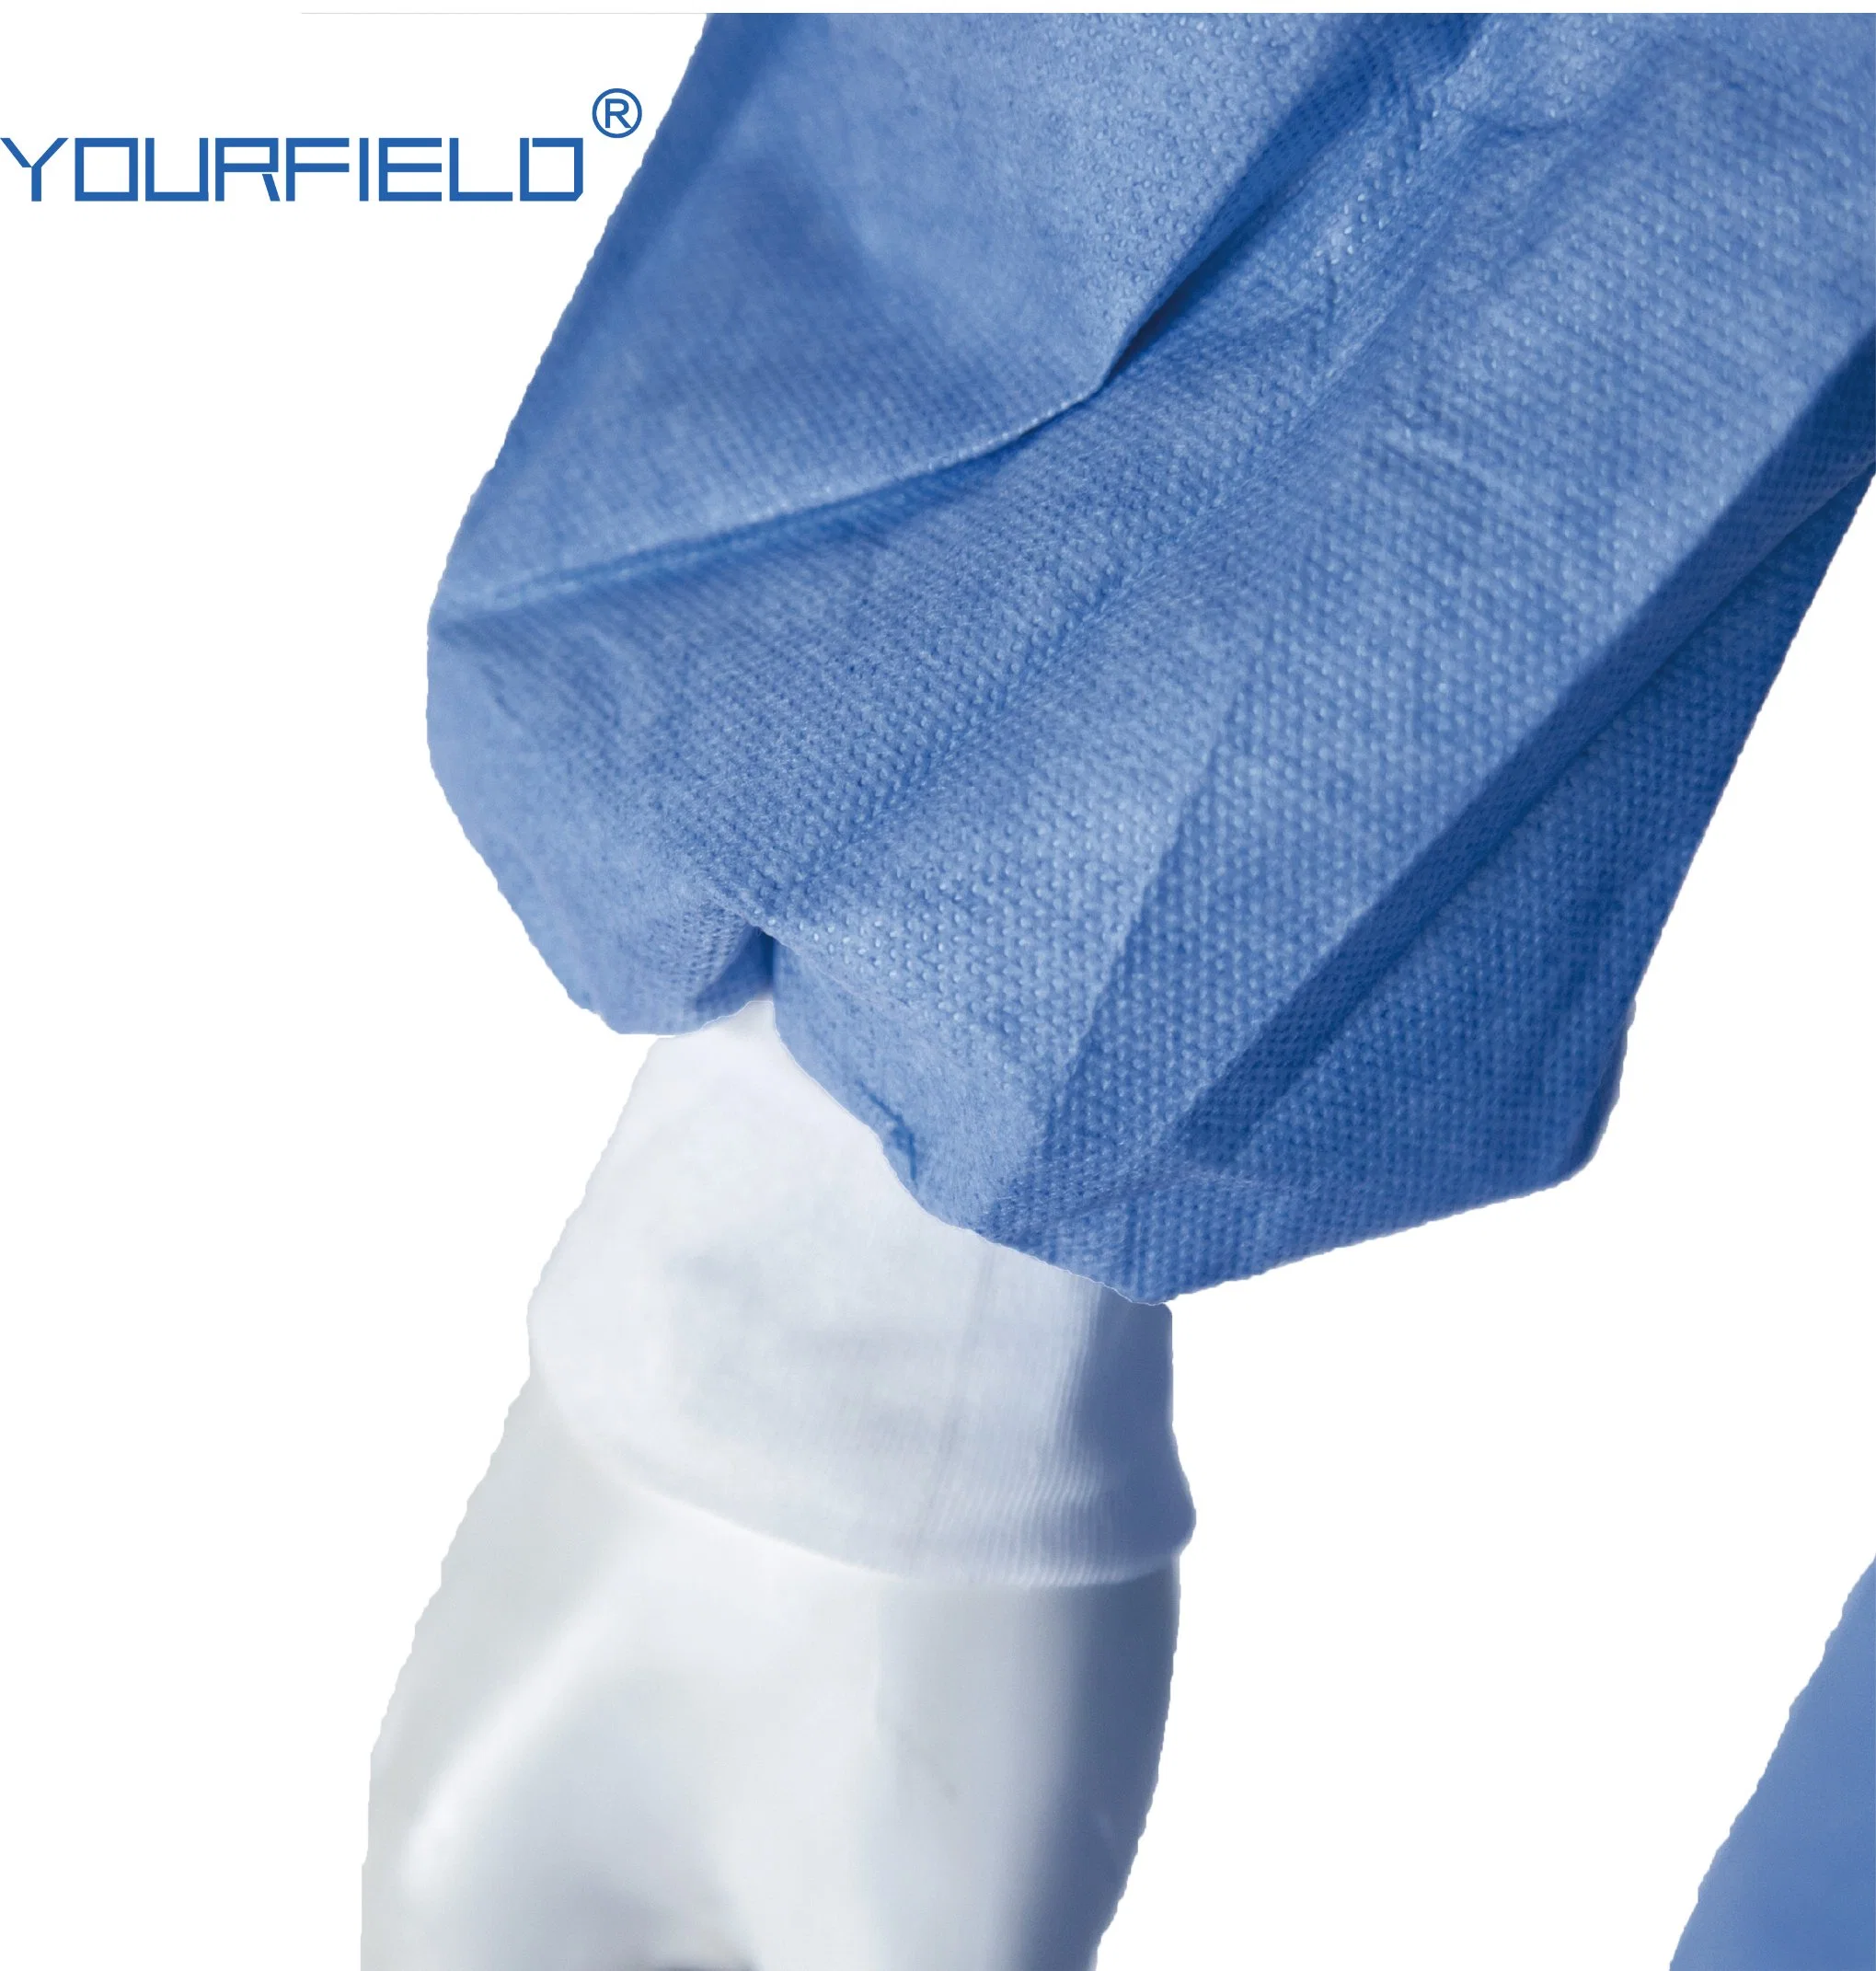 Level 2 Nonwoven Disposable Isolation Gown with Cuff